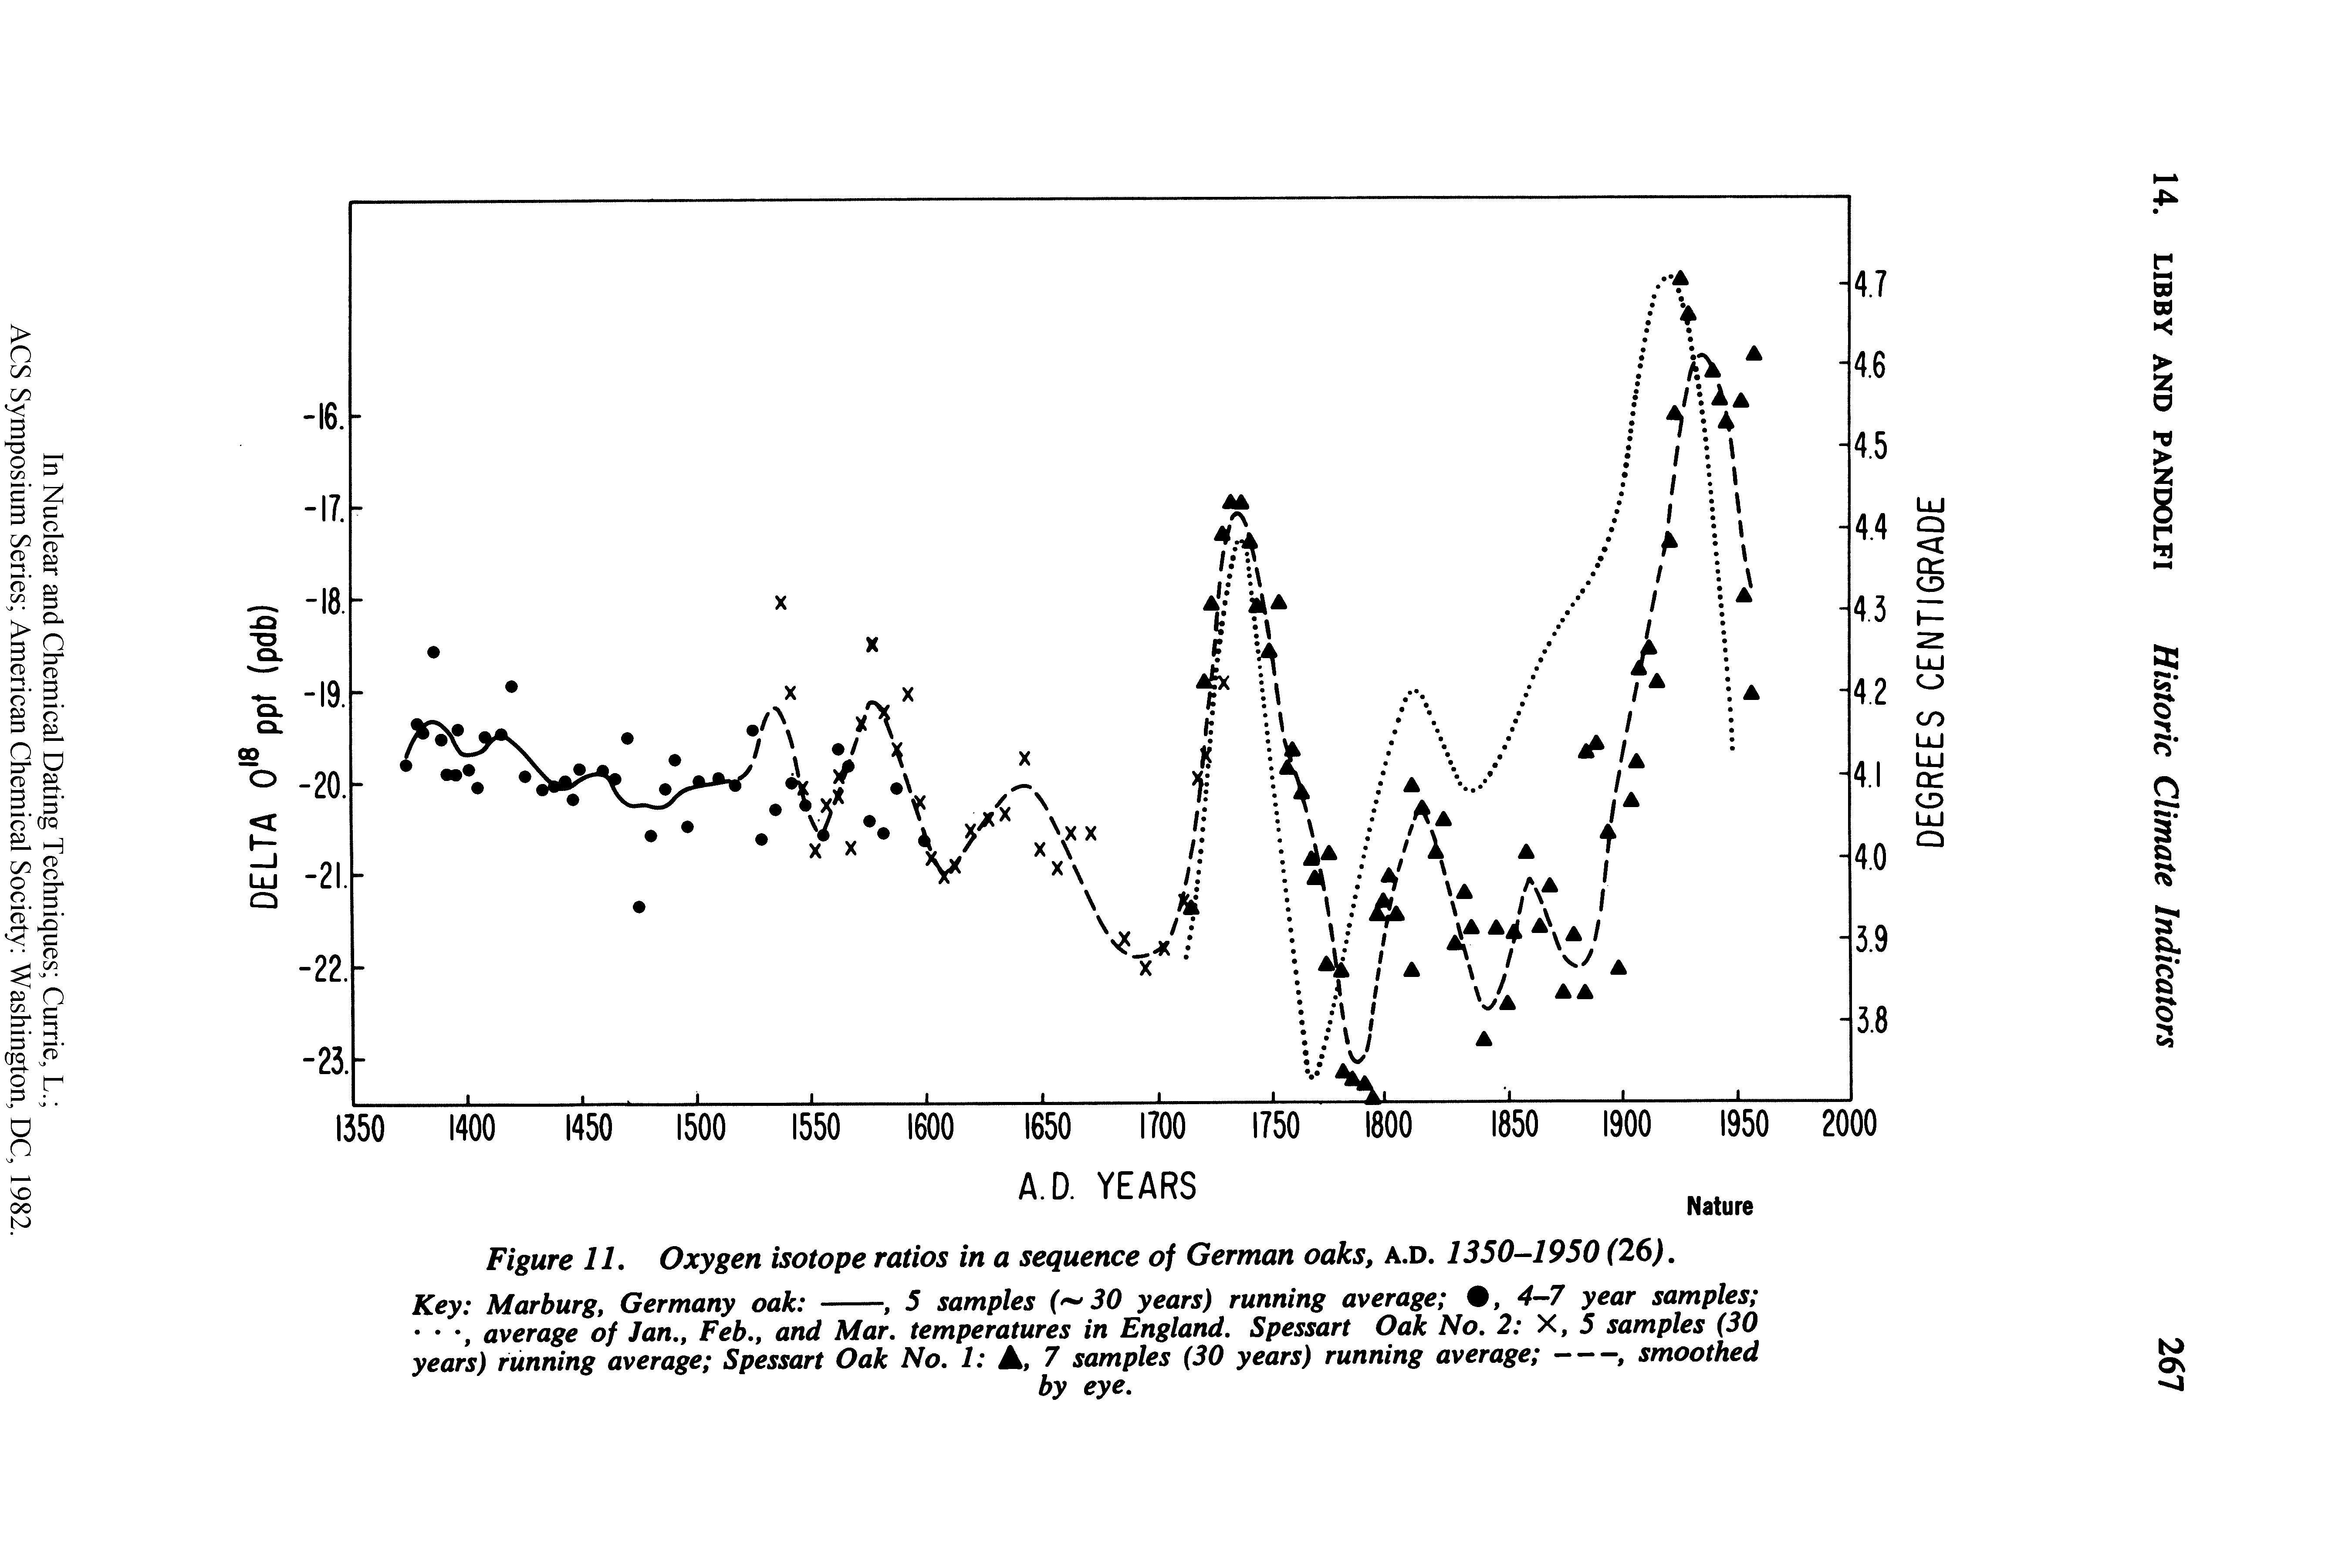 Figure 11. Oxygen isotope ratios in a sequence of German oaks, a.d. 1350-1950 (26).